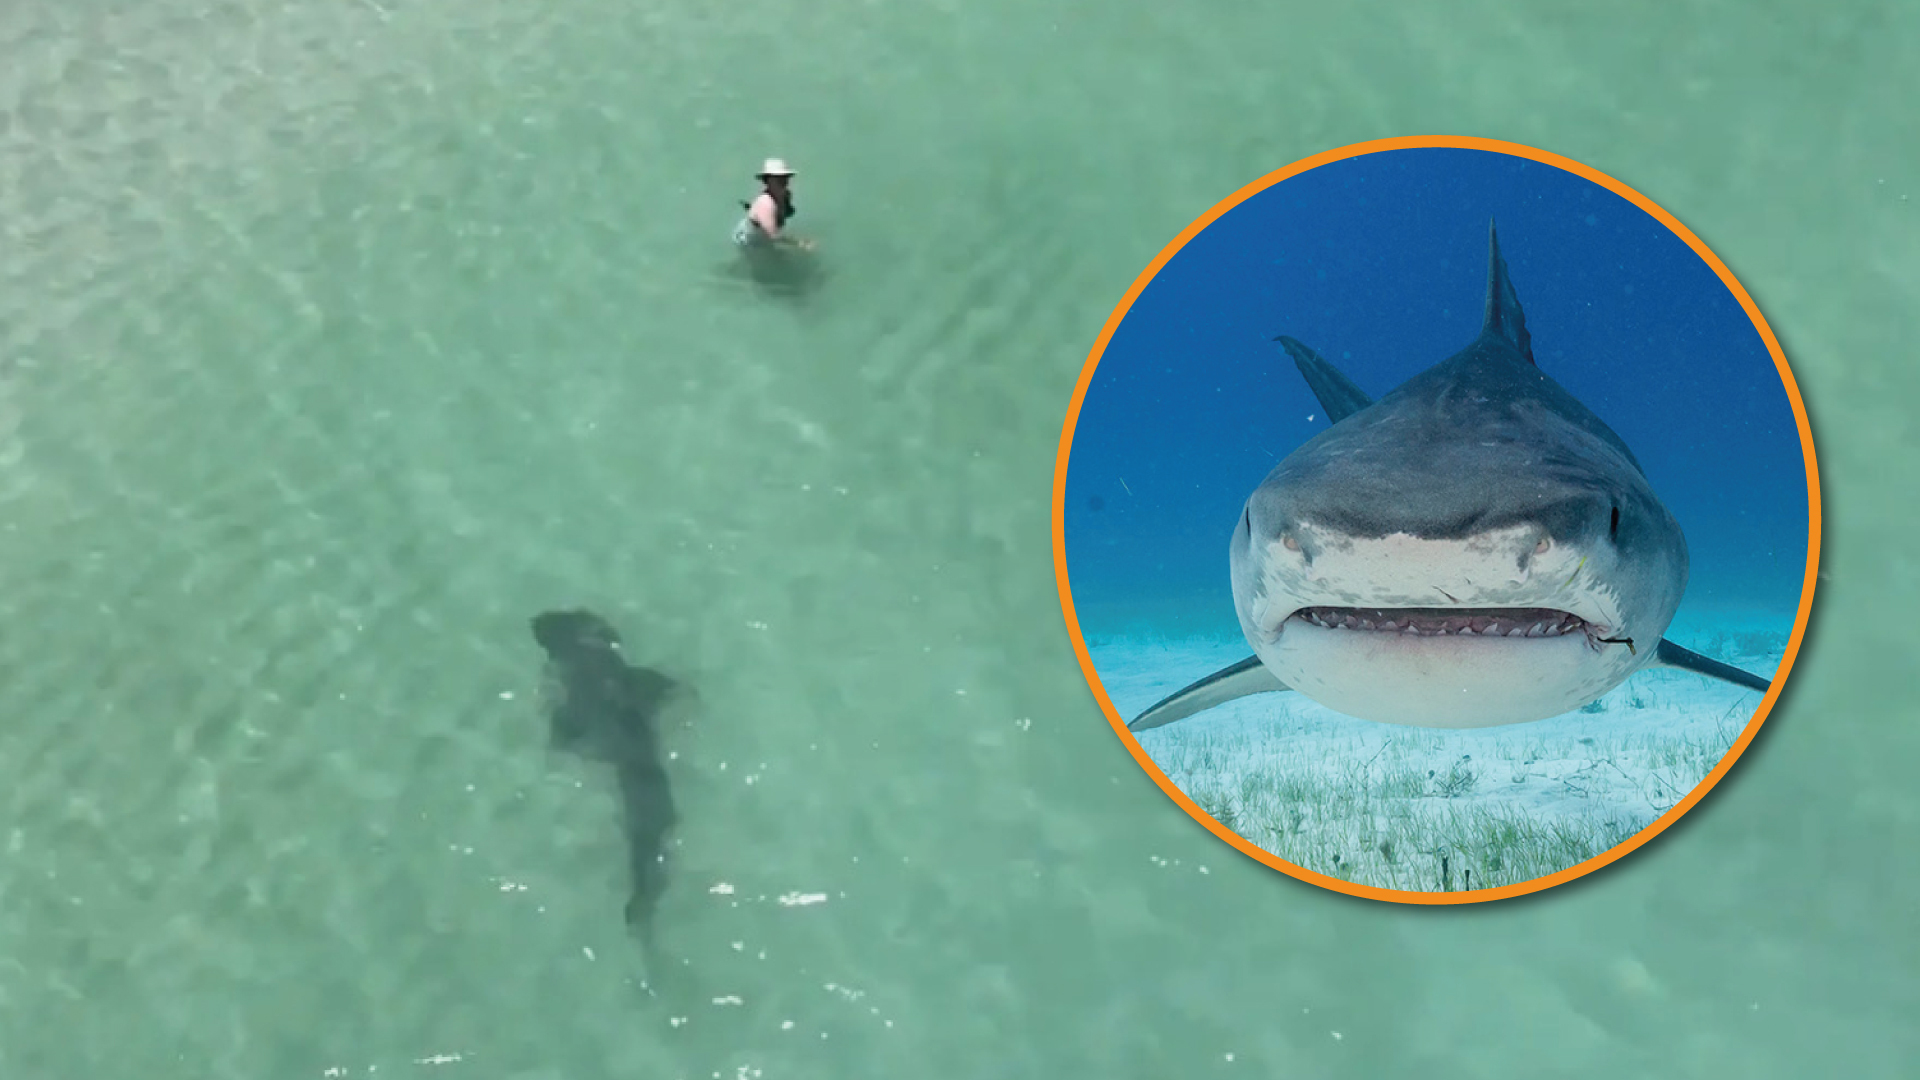 The tiger shark approached a woman who was swimming at Hillary's Dog Beach